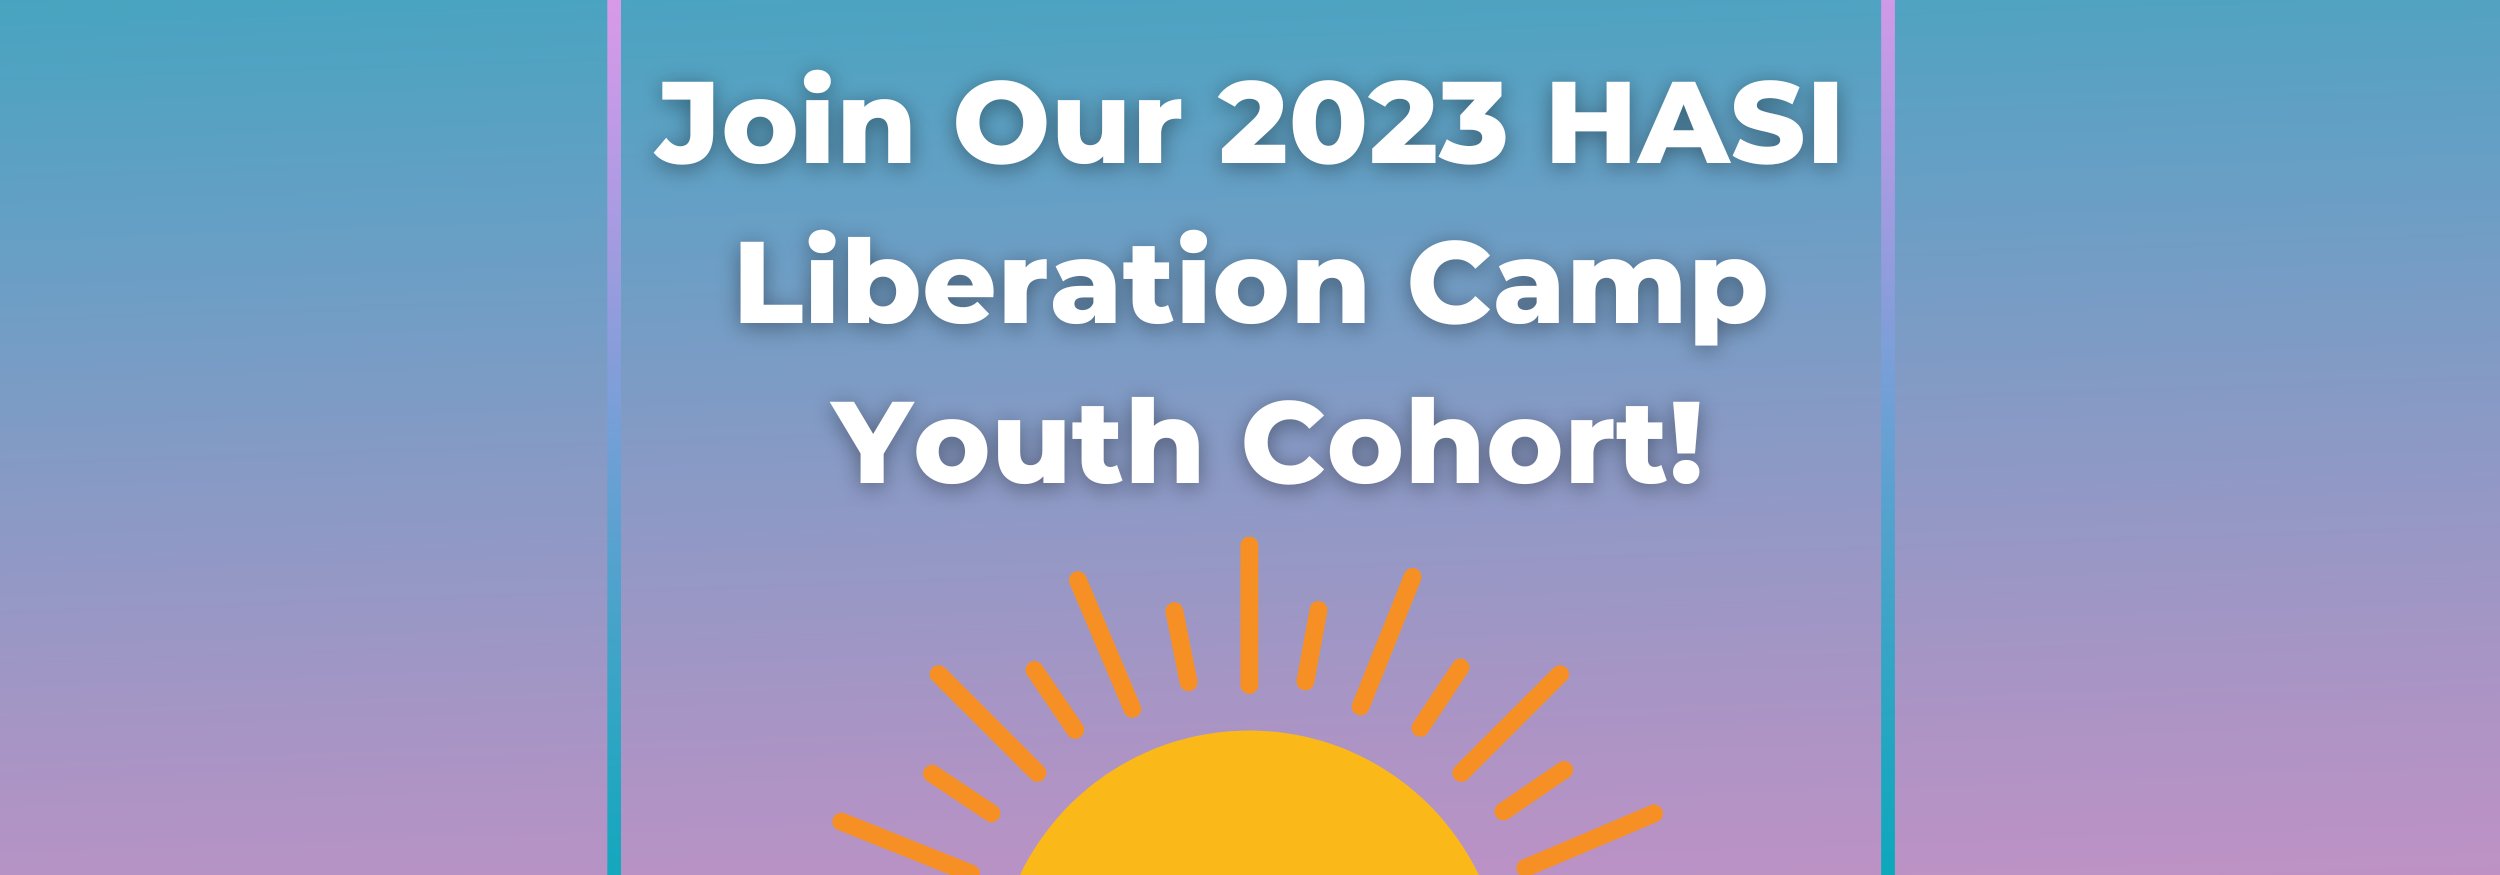 Join our 2023 Liberation Camp Youth Cohort